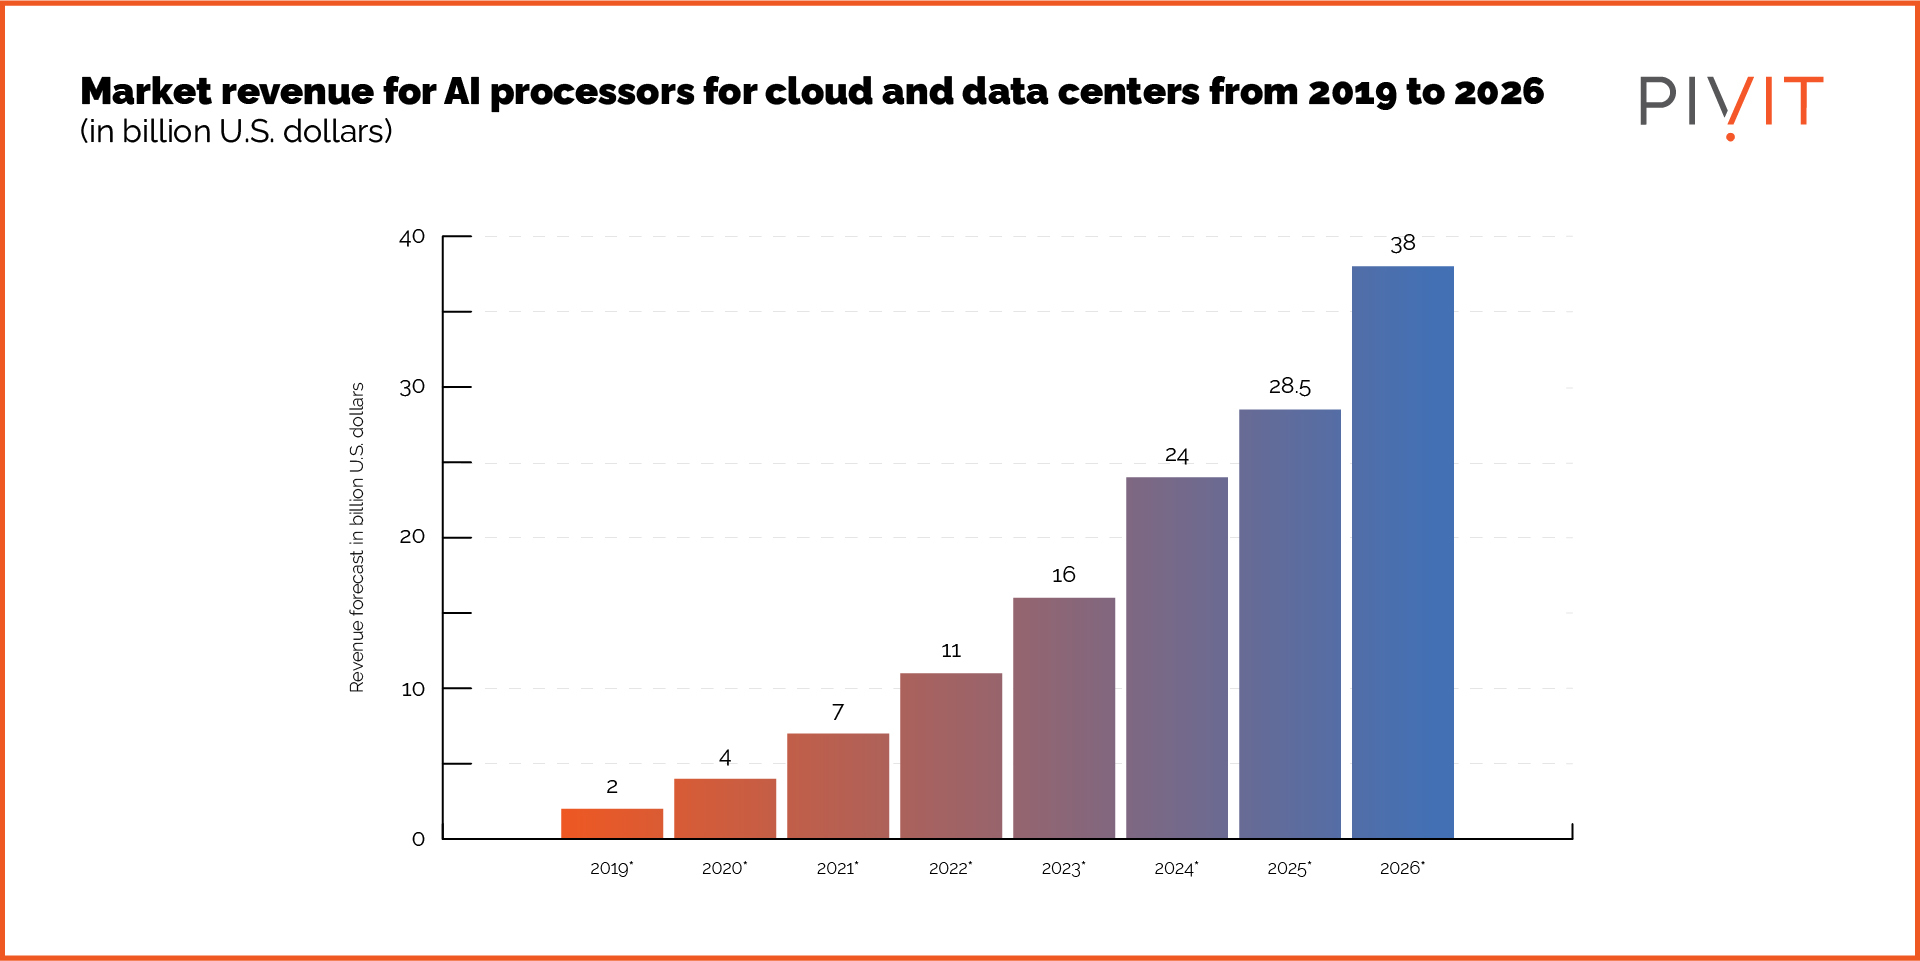 Market revenue for AI processors for cloud and data centers from 2019 to 2026 (in billion U.S. dollars)